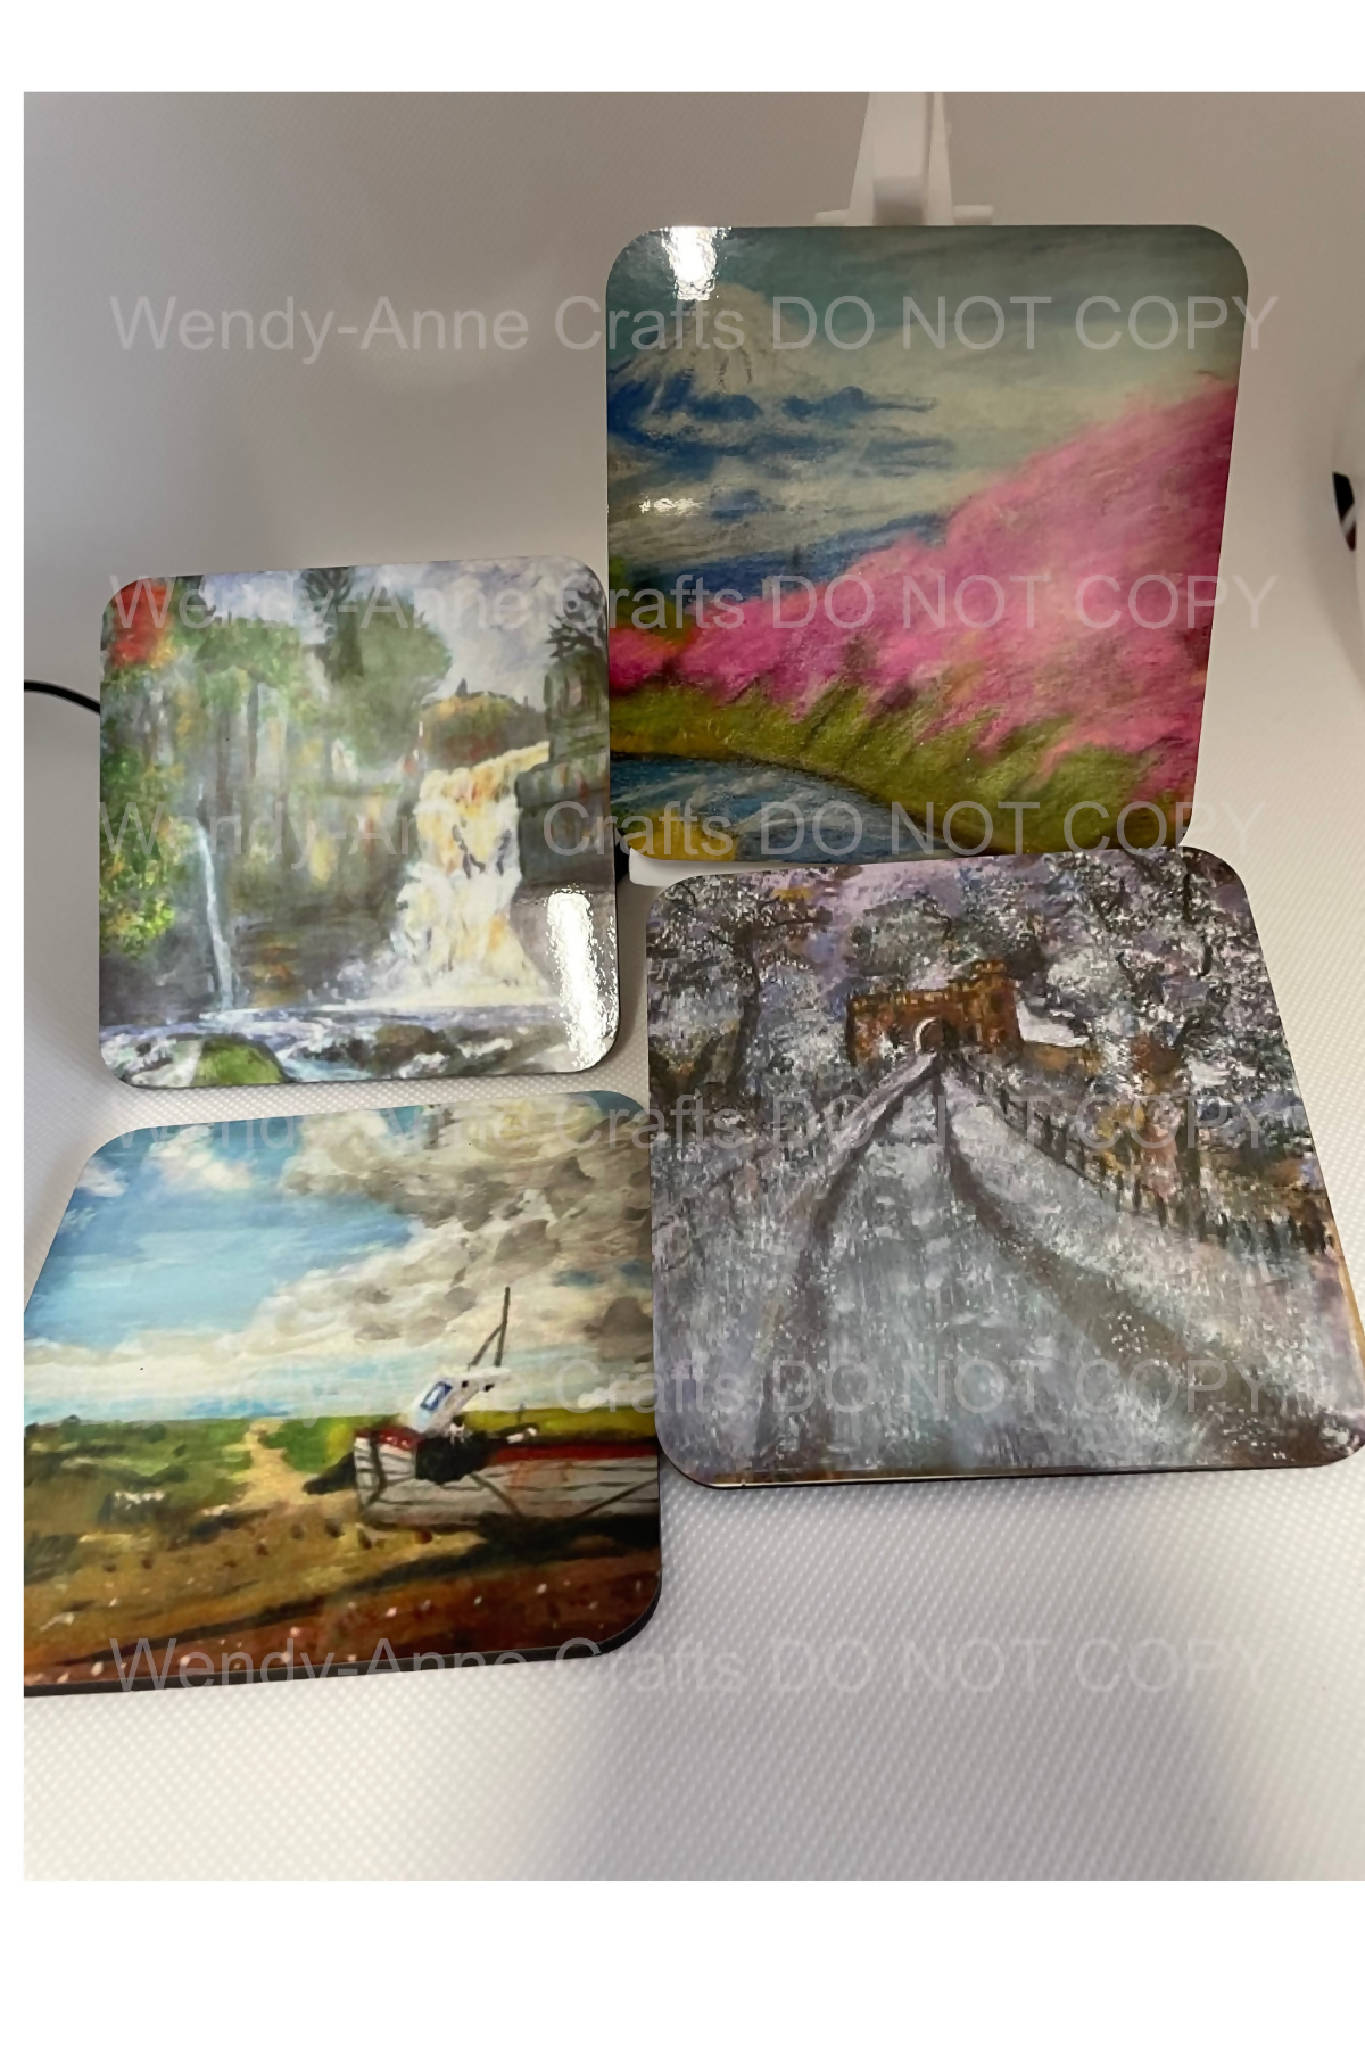 Lovely set of 4 coasters from original hand painted art